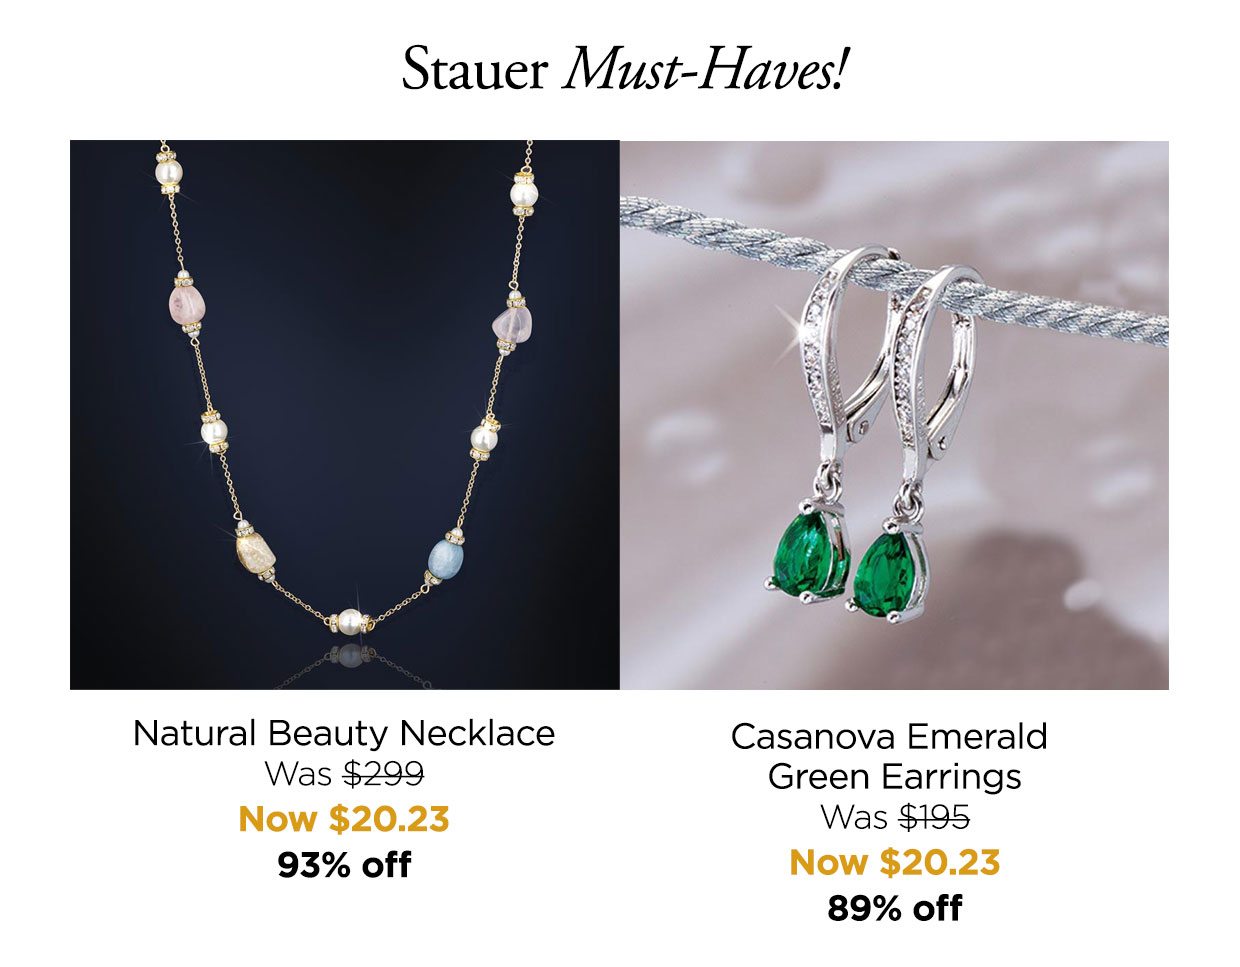 Natural Beauty Necklace Was $299, Now $20.23. 93% off. Casanova Emerald Green Earrings Was $195, Now $20.23, 89% off